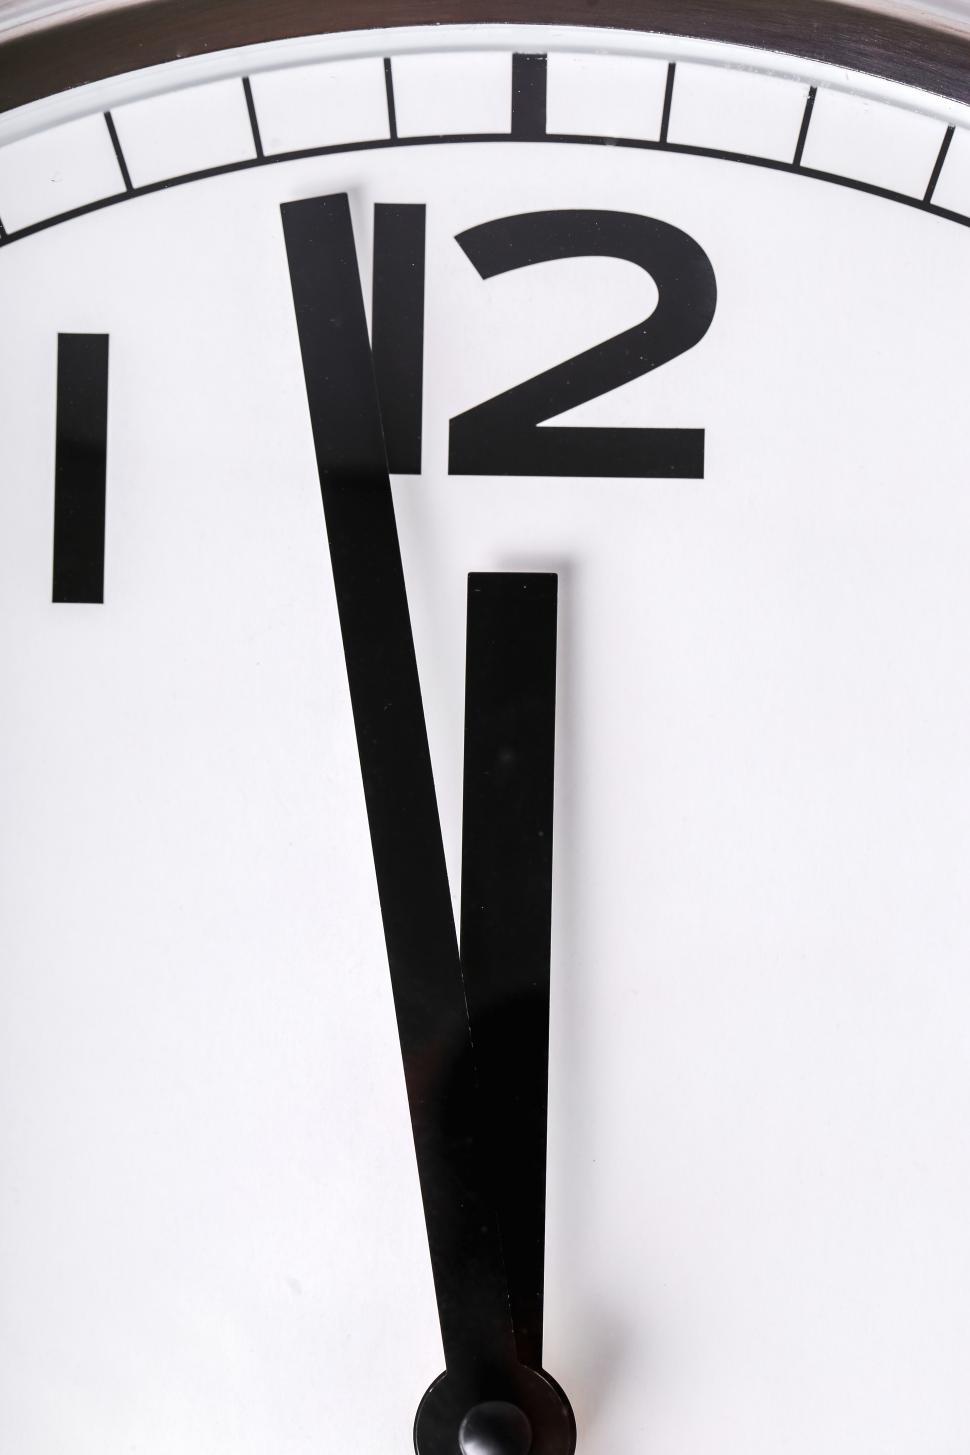 Free Image of Clock approaching 12 noon or midnight 